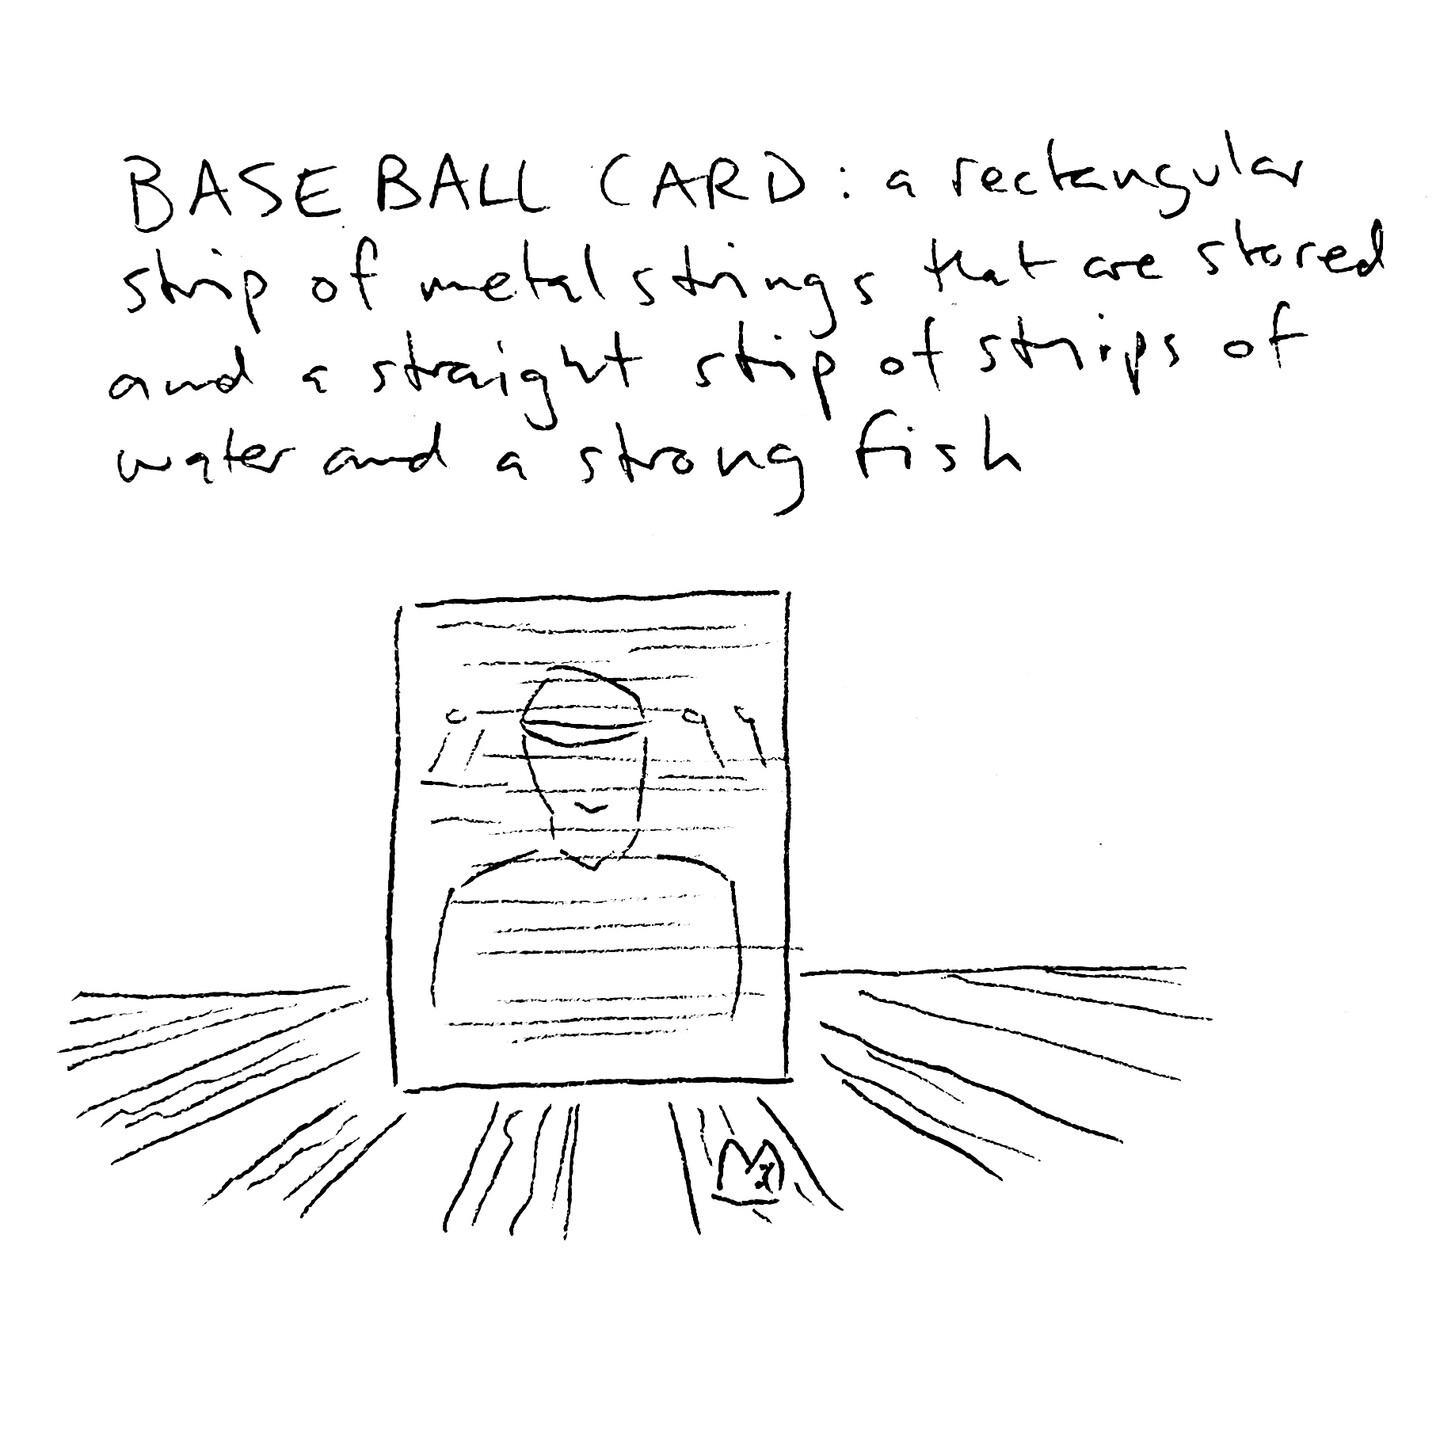 BASEBALL CARD: a rectangular strip of metal strings that are attired and a straight strip of strips of water and a strong fish. The drawing depicts a rectangular portrait of a baseball player with crosshatching standing above a landscape of straight canals. A fish is poking its face from one of the canals.